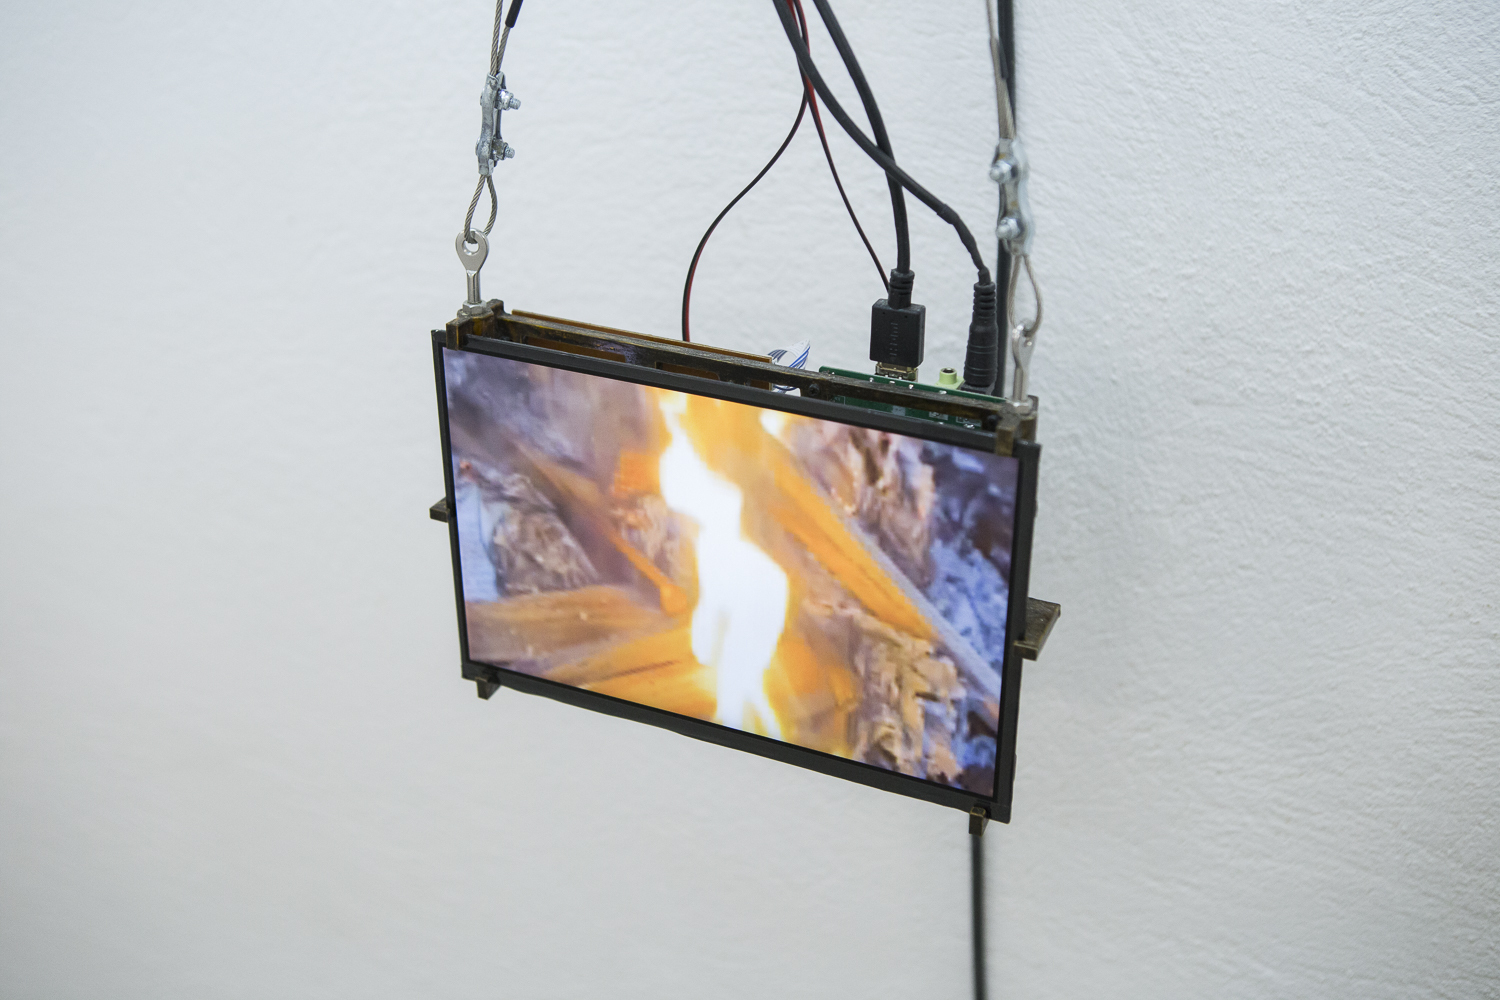 Detail of Thomas P. Grogan, L’Ami du Feu, 2021, Polyester resin, stone grit, oxidised steel, polylactic acid, copper powder, stepper motor, Raspberry Pi, power supply, computer fans, push button, accelerometer, 11 inch screen and interface, 90 x 24 x 19 cm